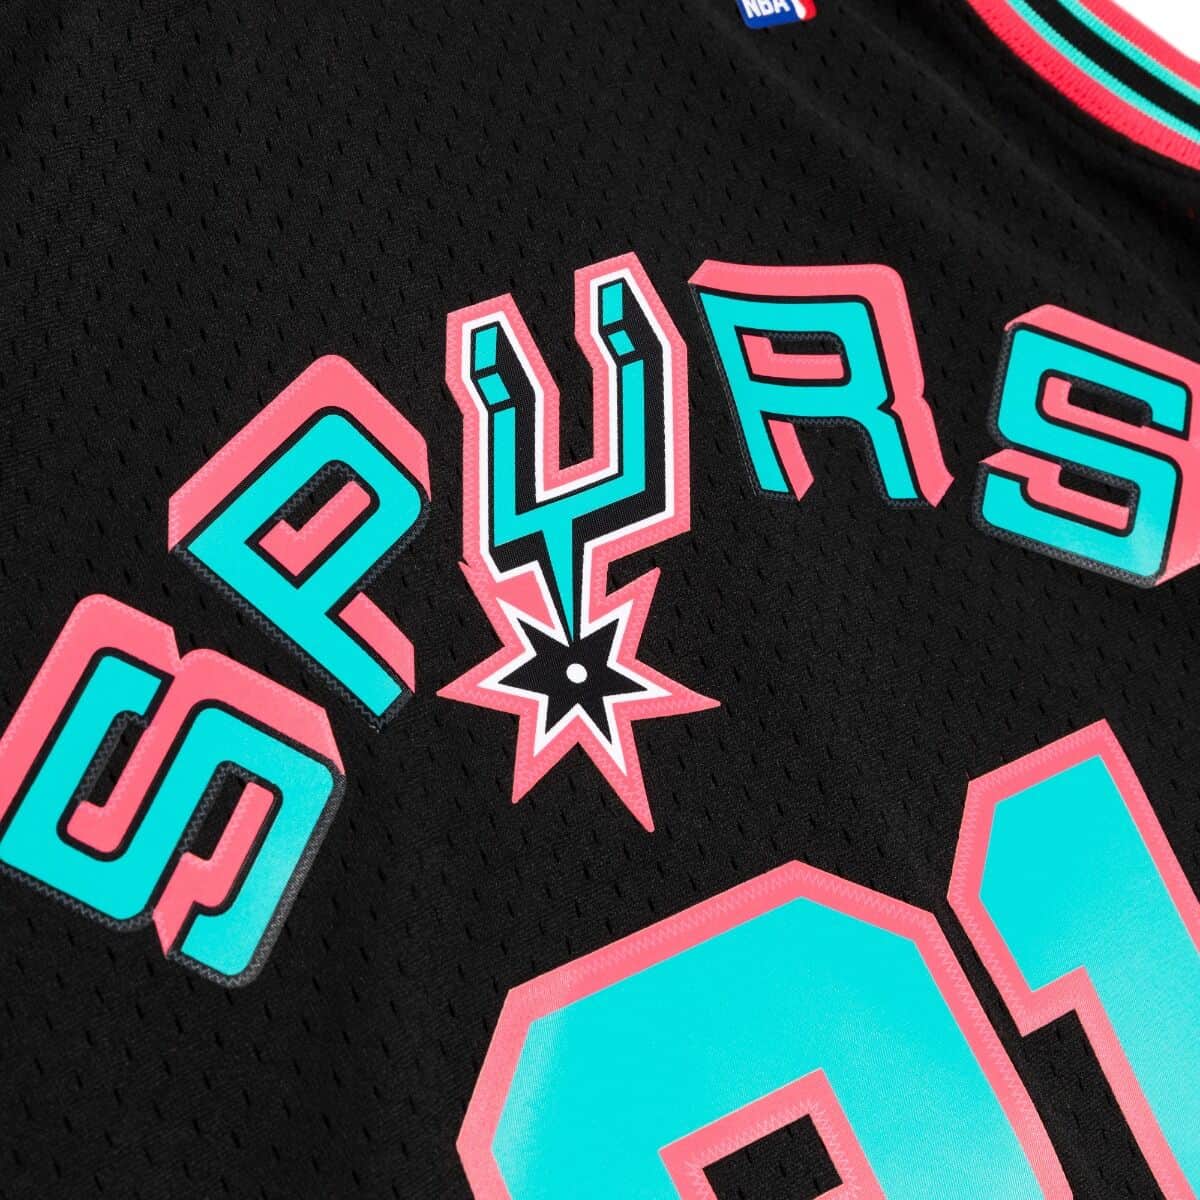 Party like it's 1996! Spurs new City Edition jerseys pays homage